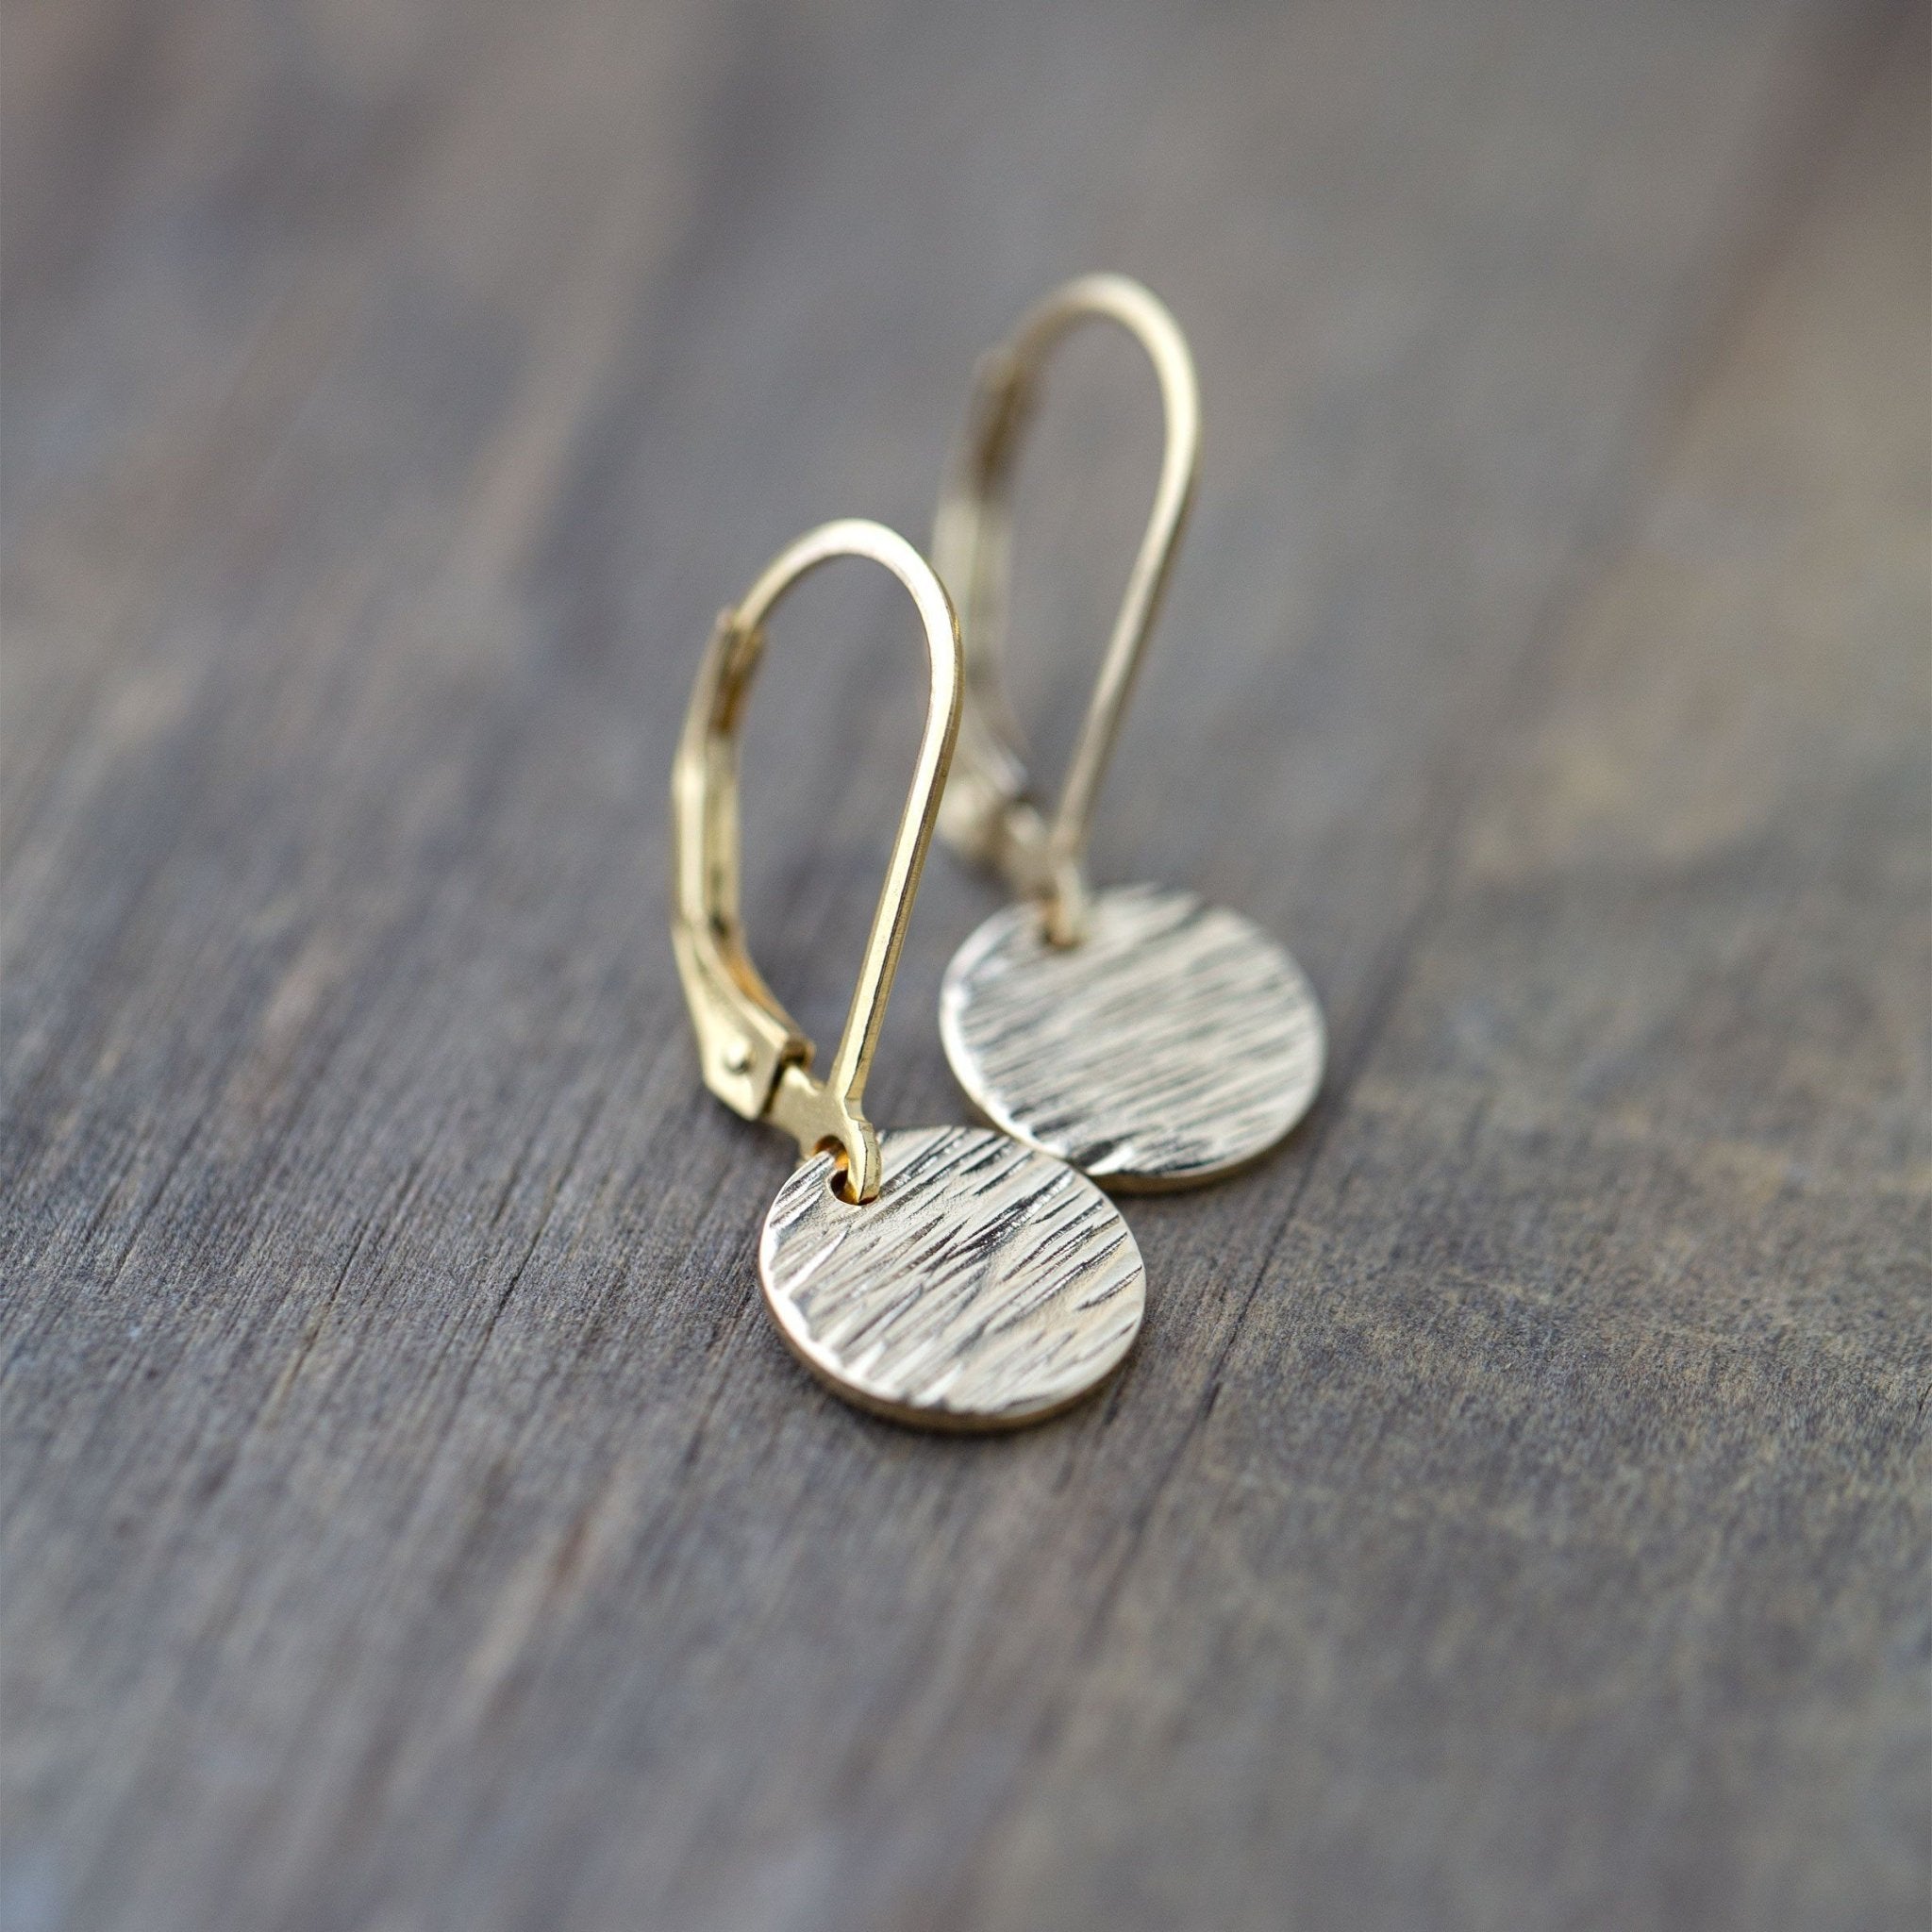 Gold Textured Disc Lever-back Earrings - Handmade Jewelry by Burnish